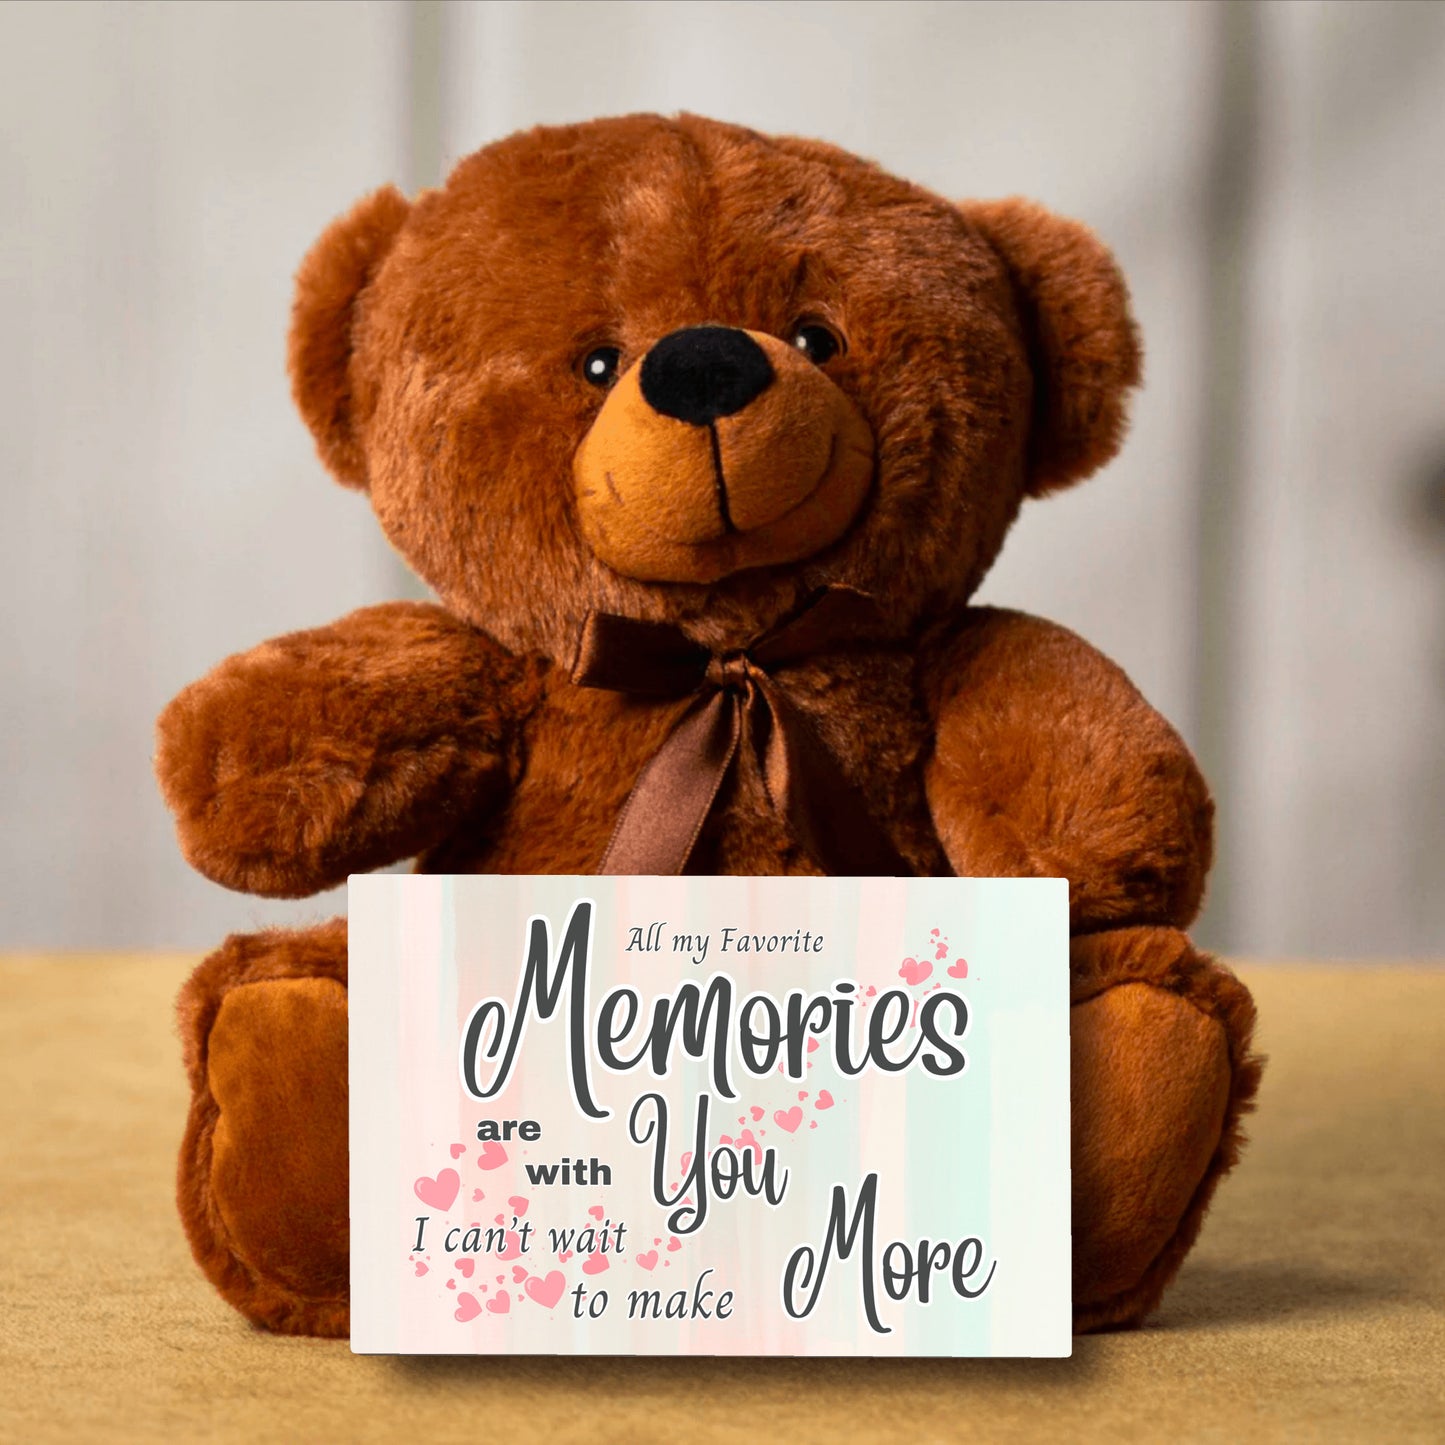 All my favorite Memories are of you, I can't wait to make more - Teddy Bear